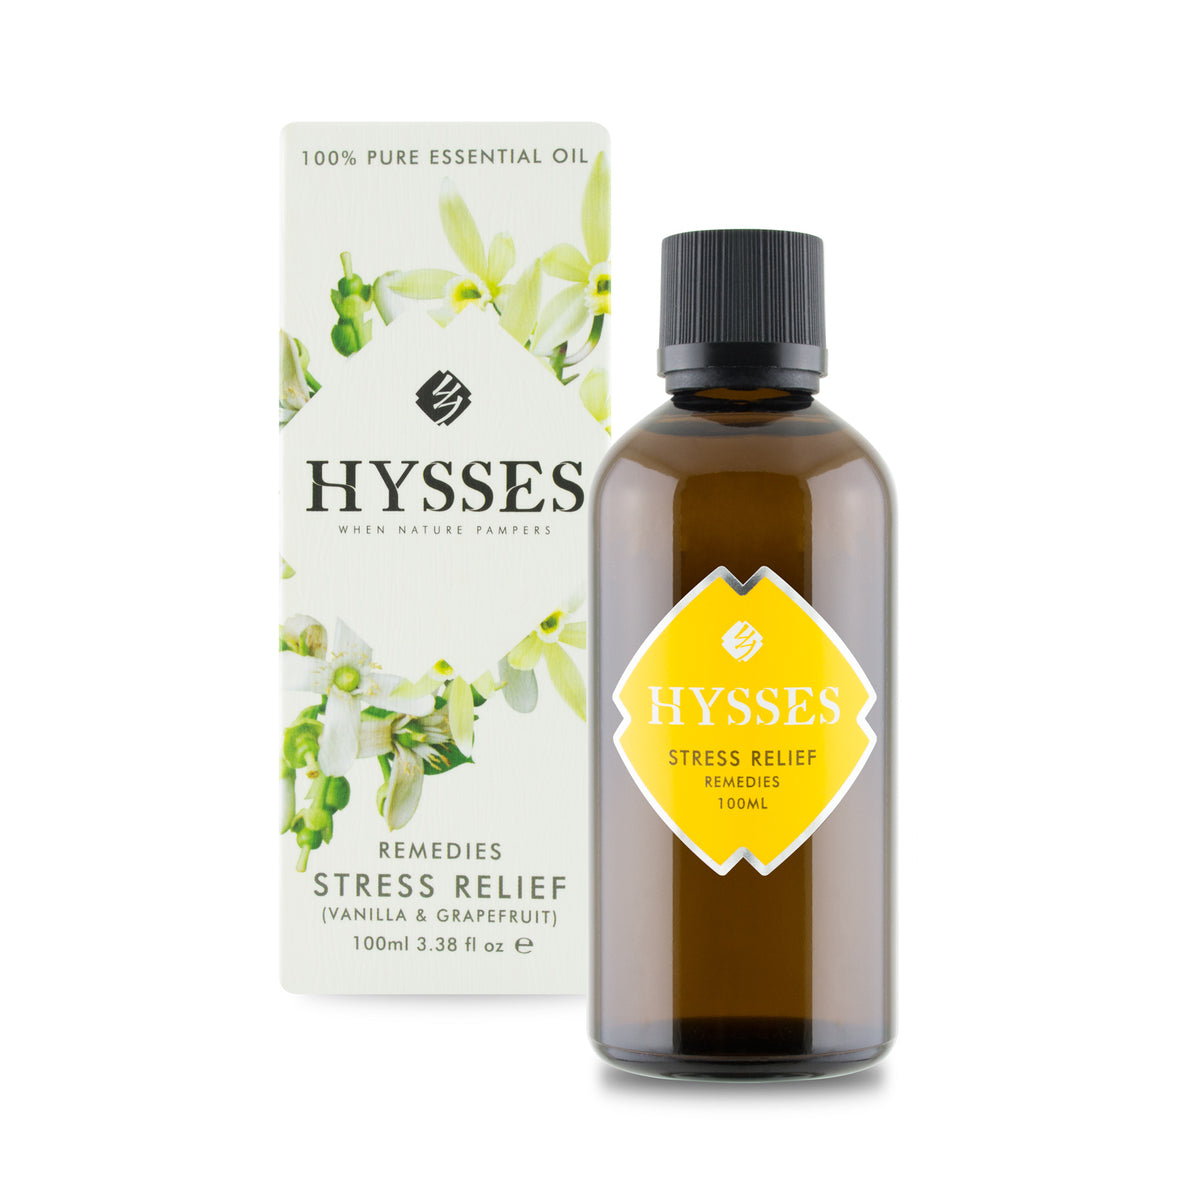 Remedies, Stress Relief - HYSSES